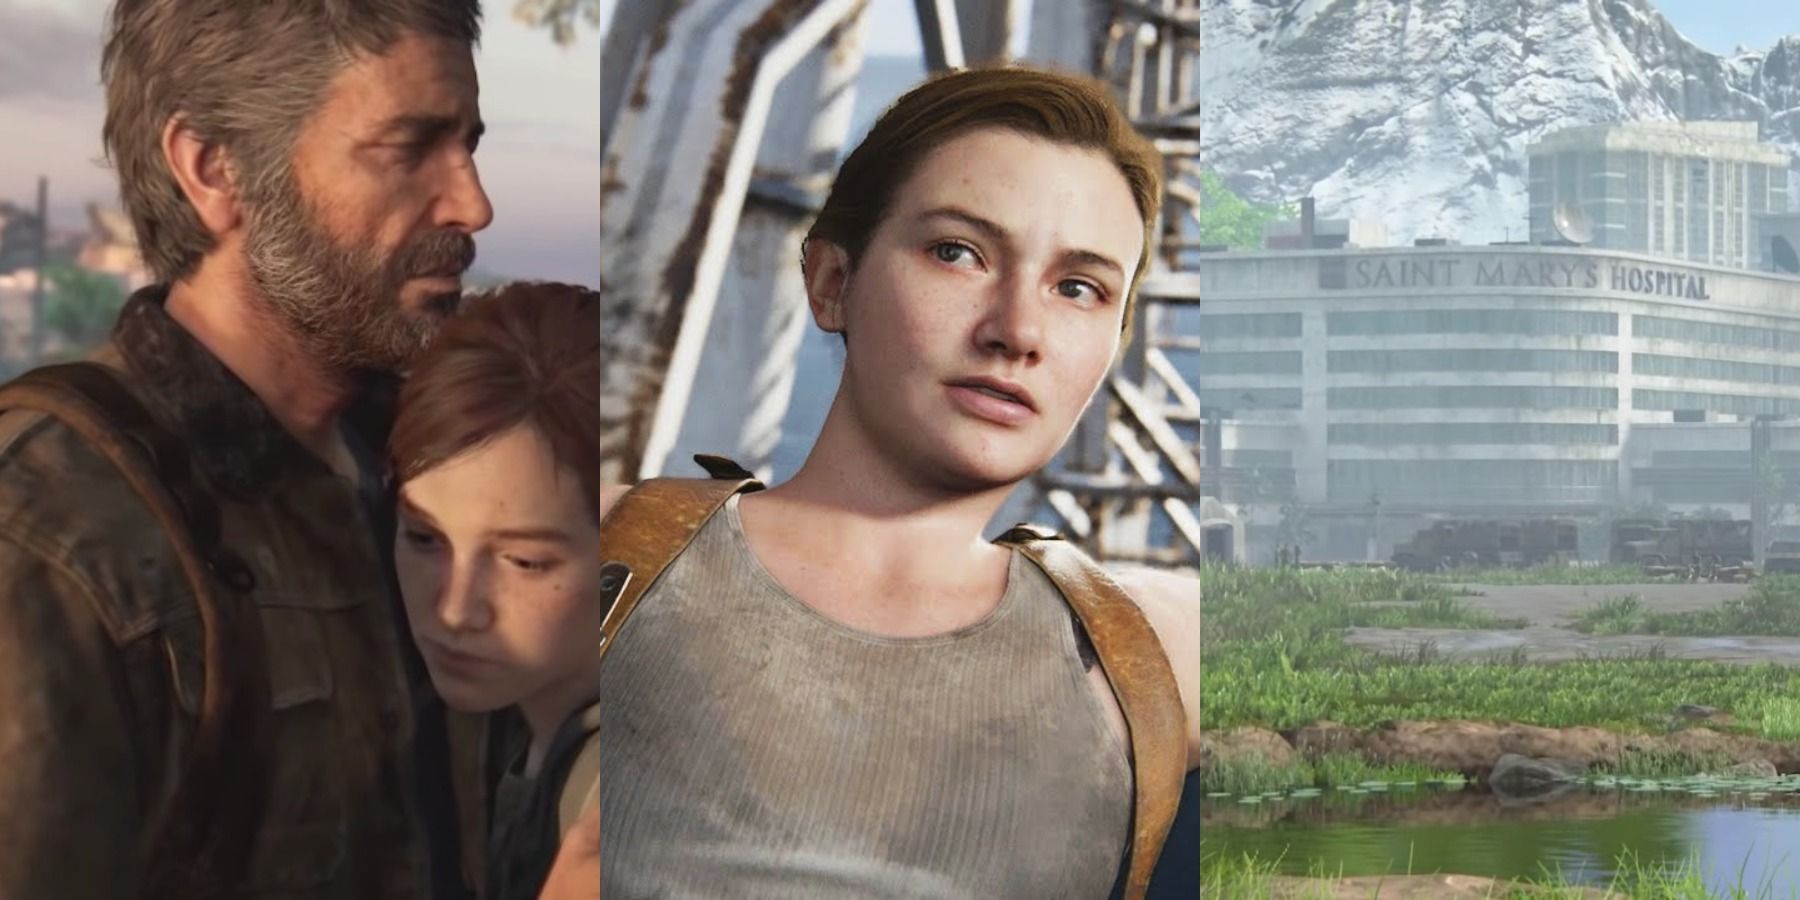 Tommy Visits Ellie and Dina Scene - THE LAST OF US 2 (THE LAST